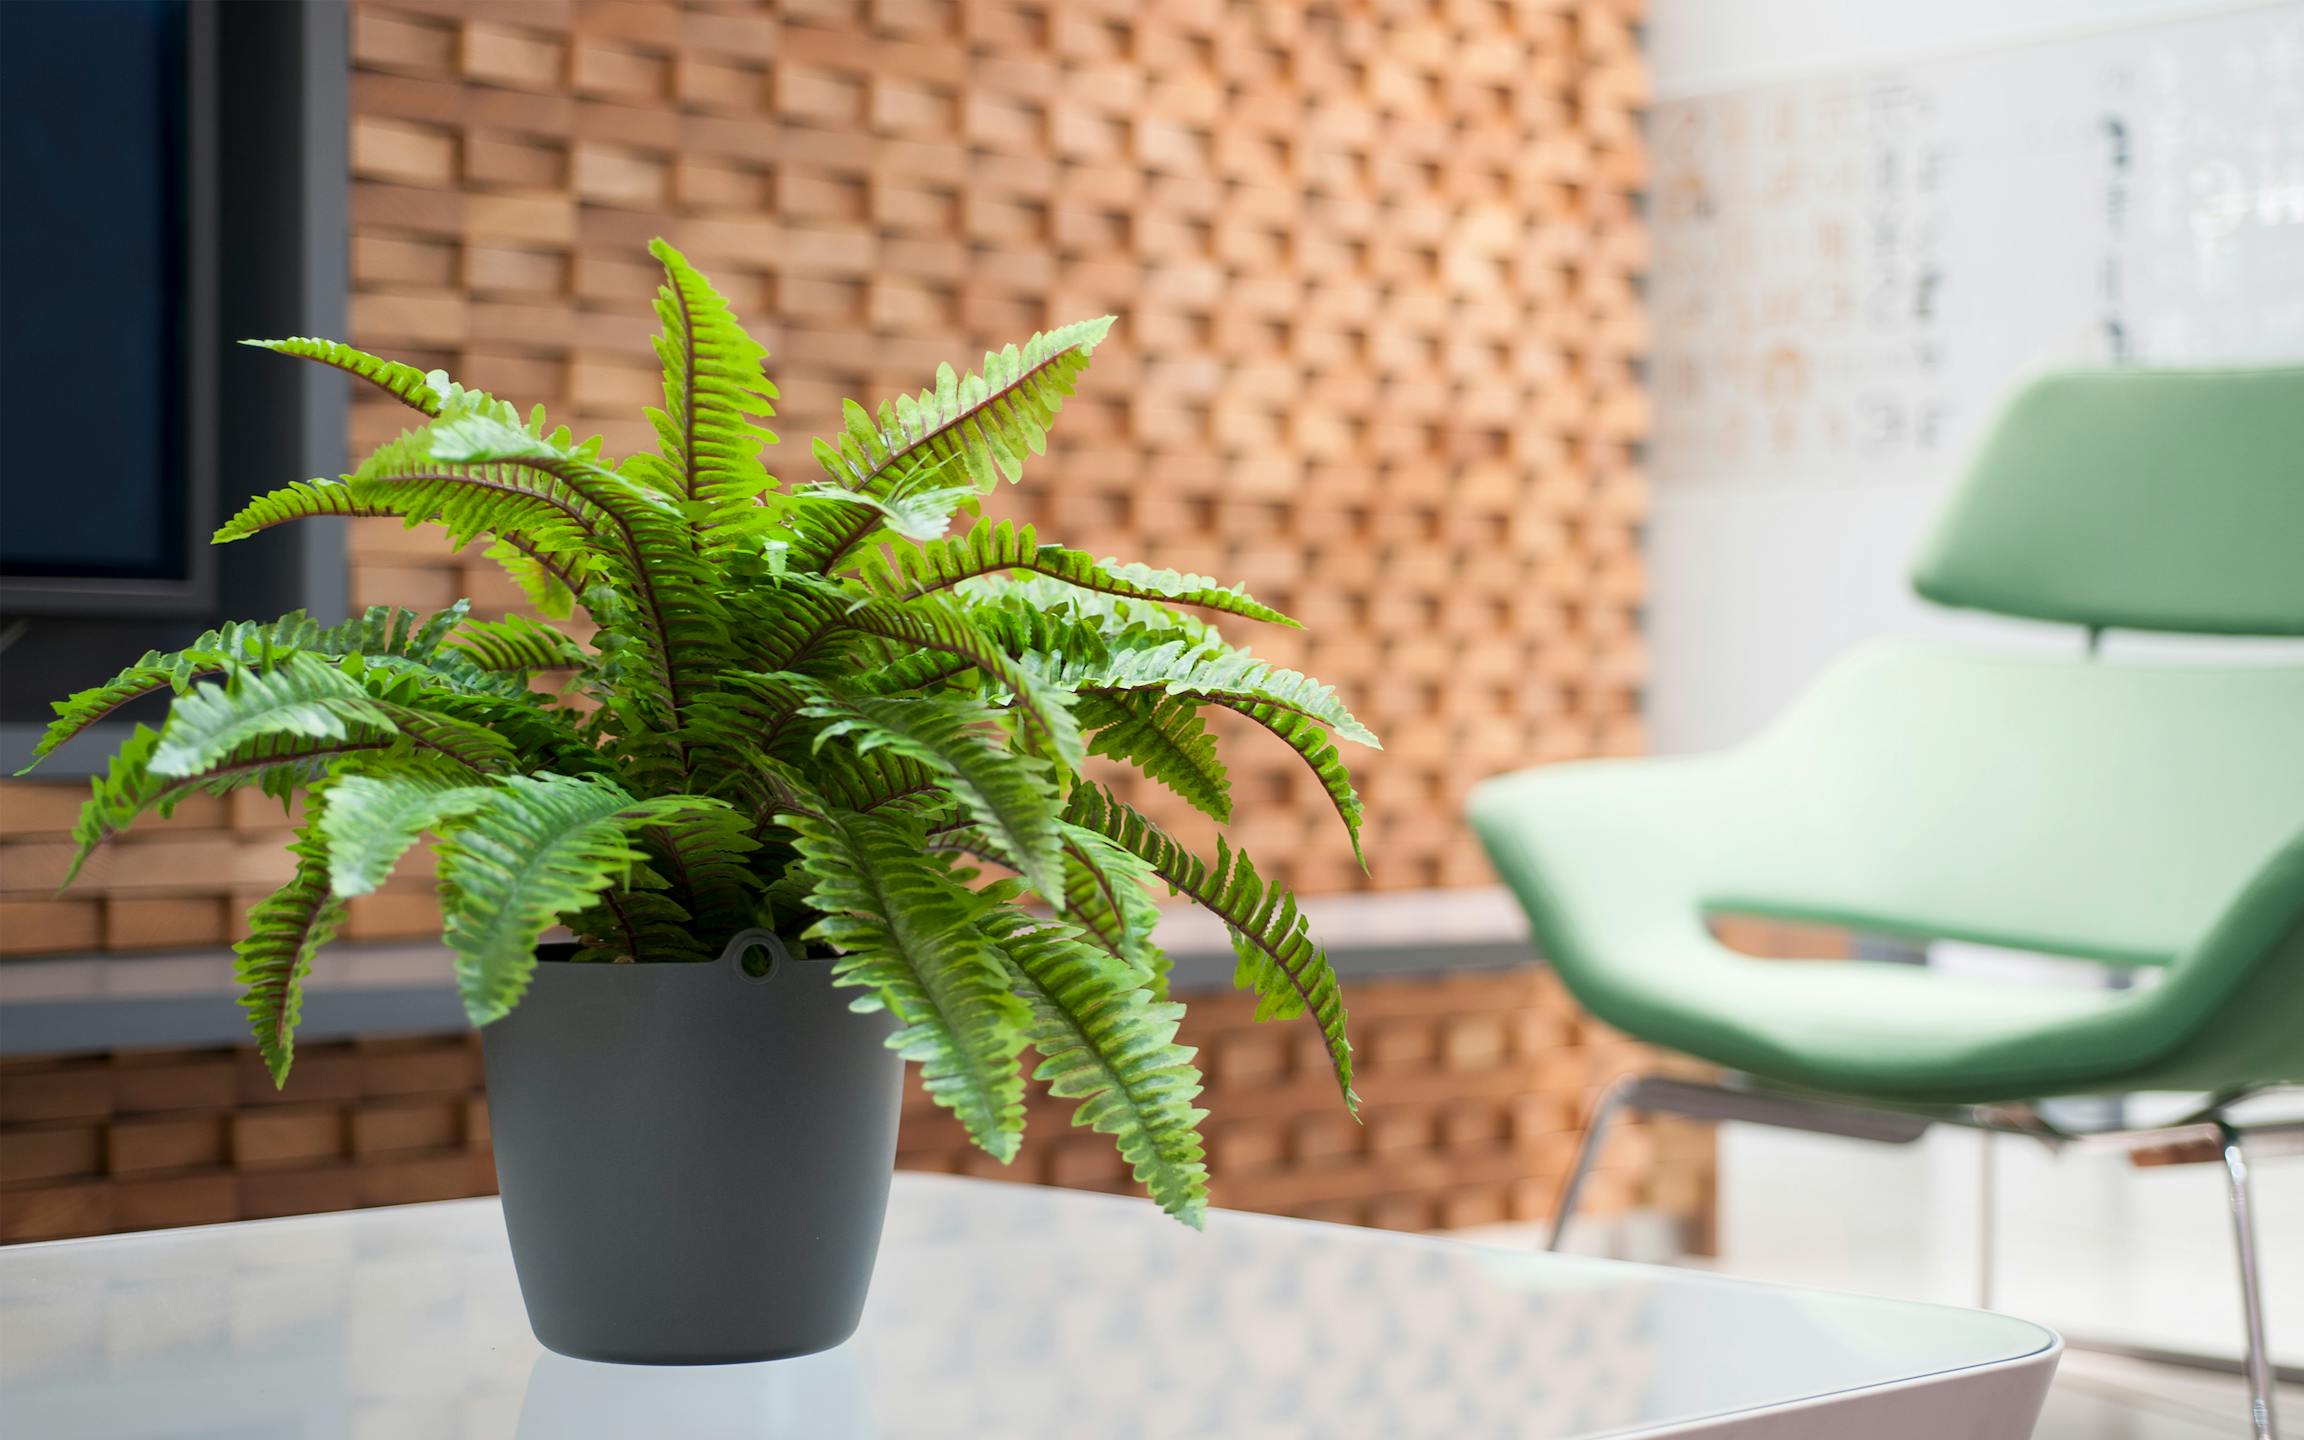 Blooming Artificial - Fake Boston fern plant on office table